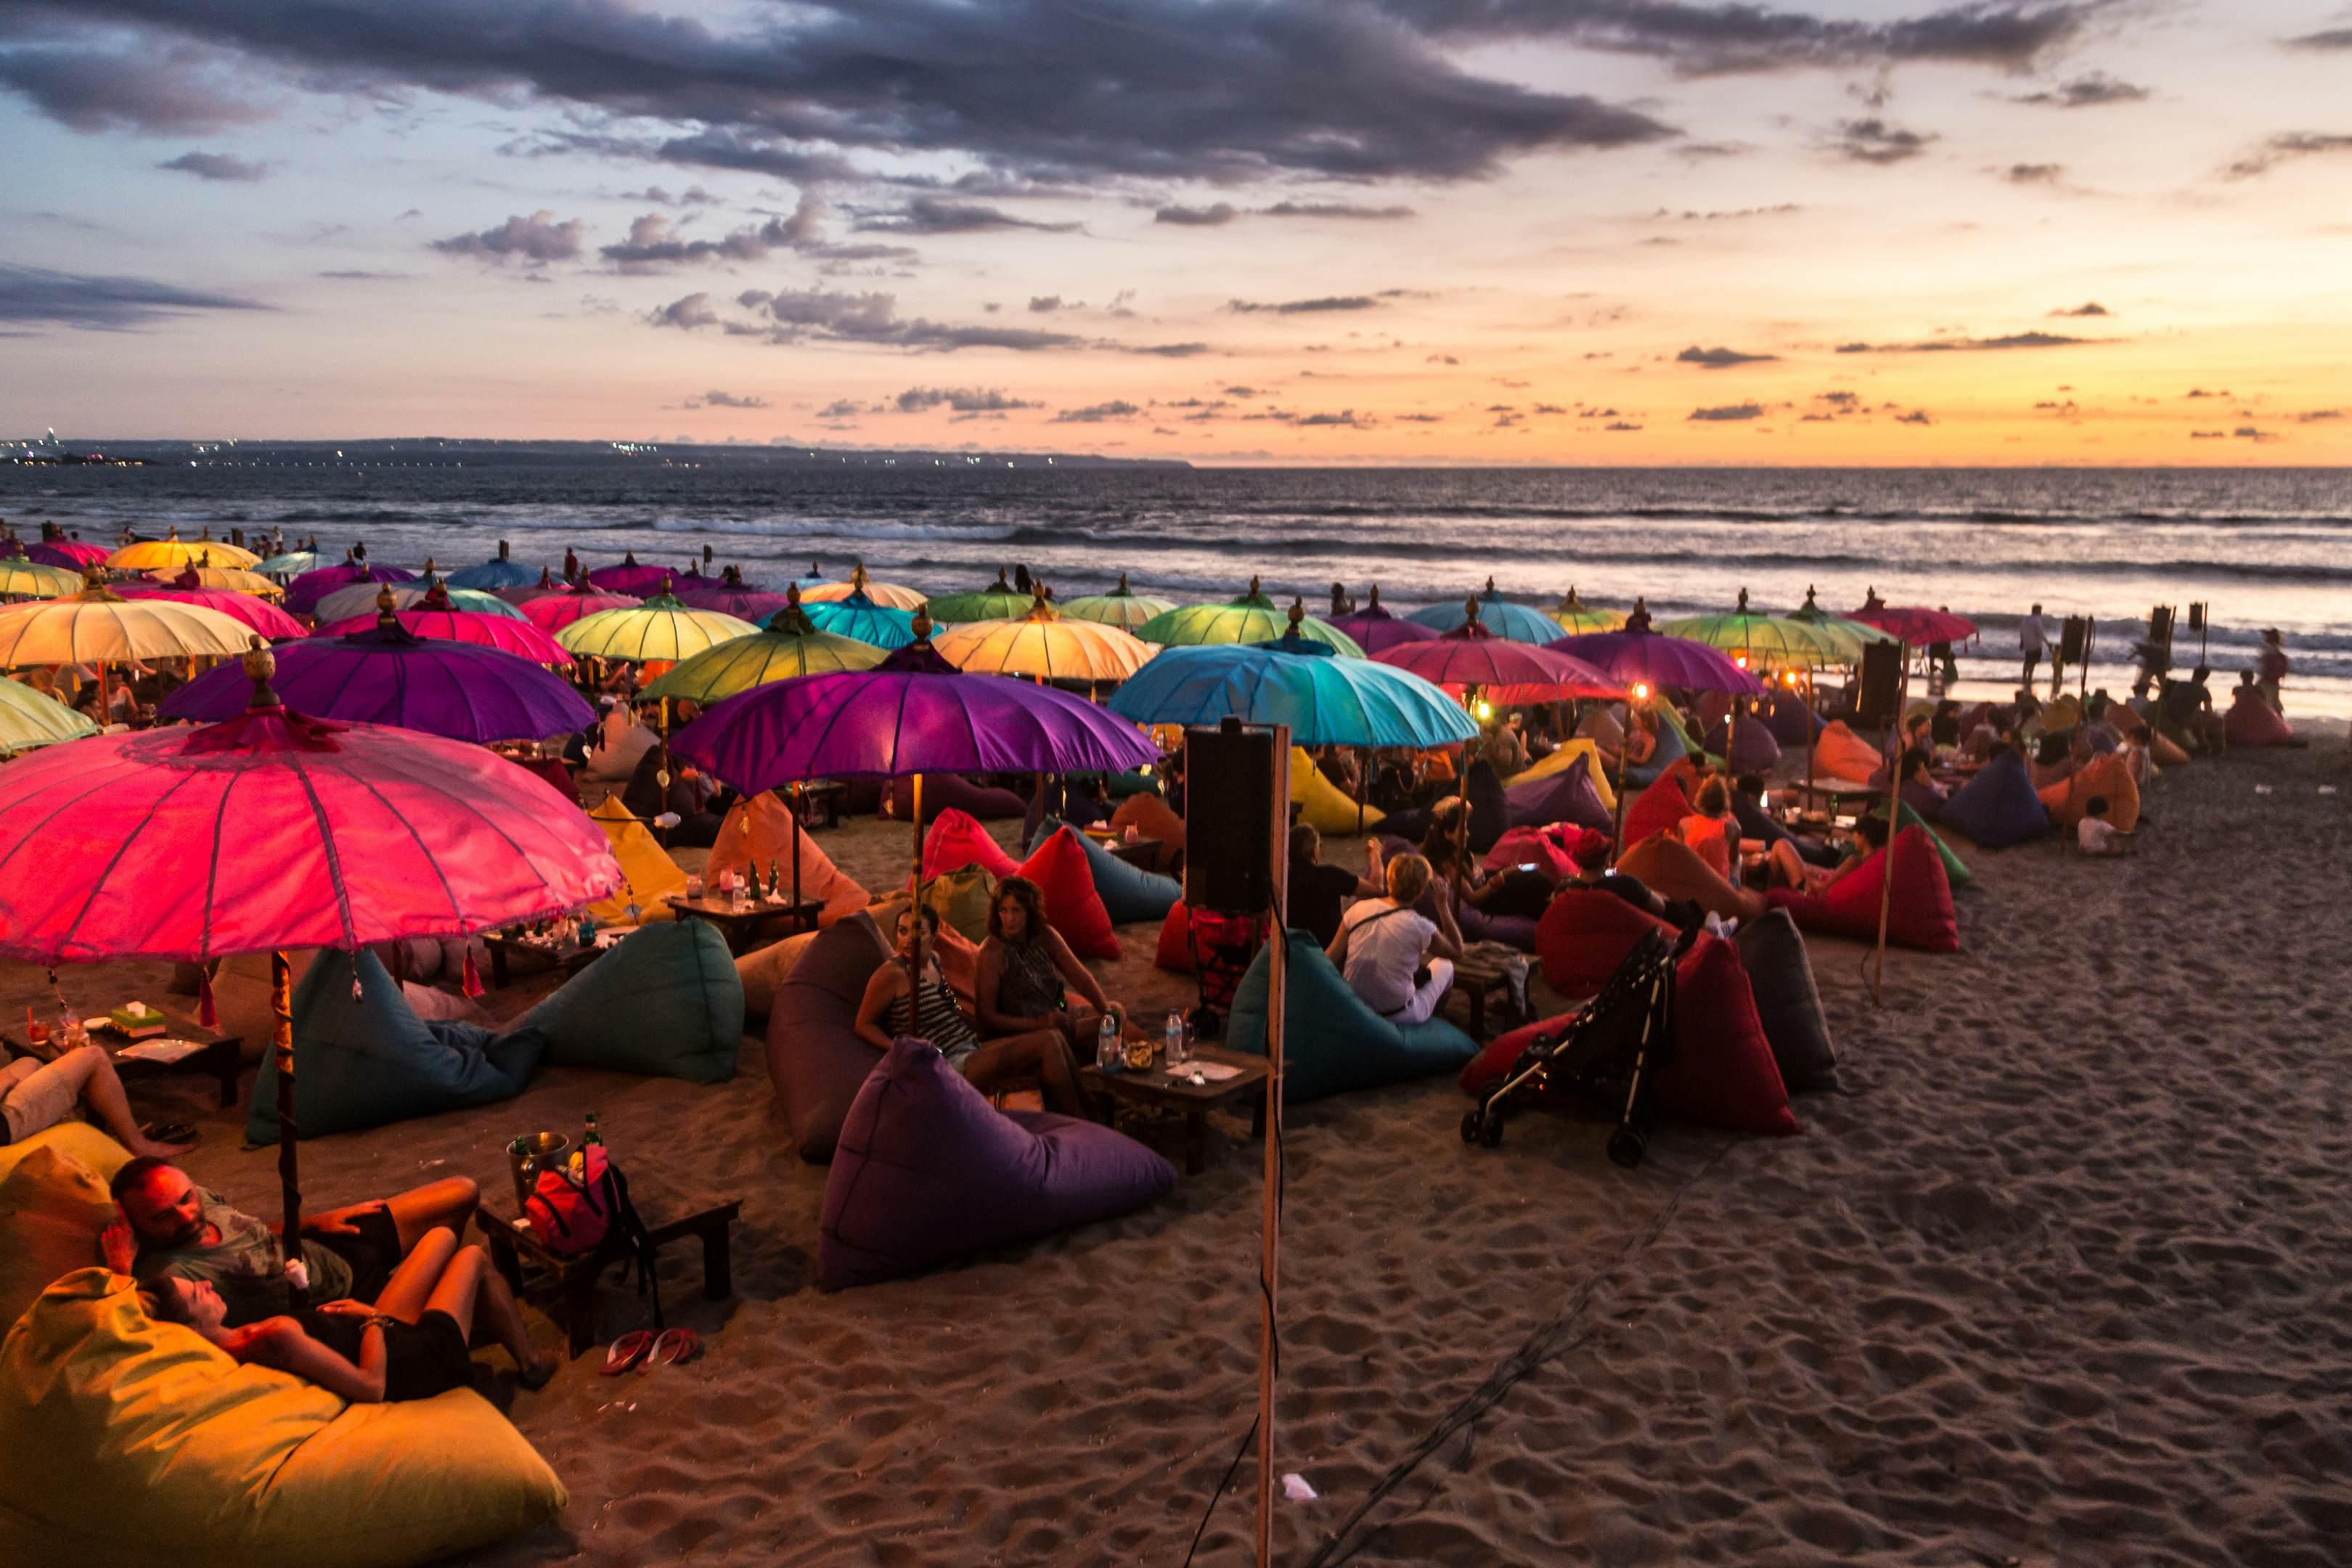 February 19, 2016: A crowd of people share food and drink under colourful umbrellas during sunset on Kuta beach.